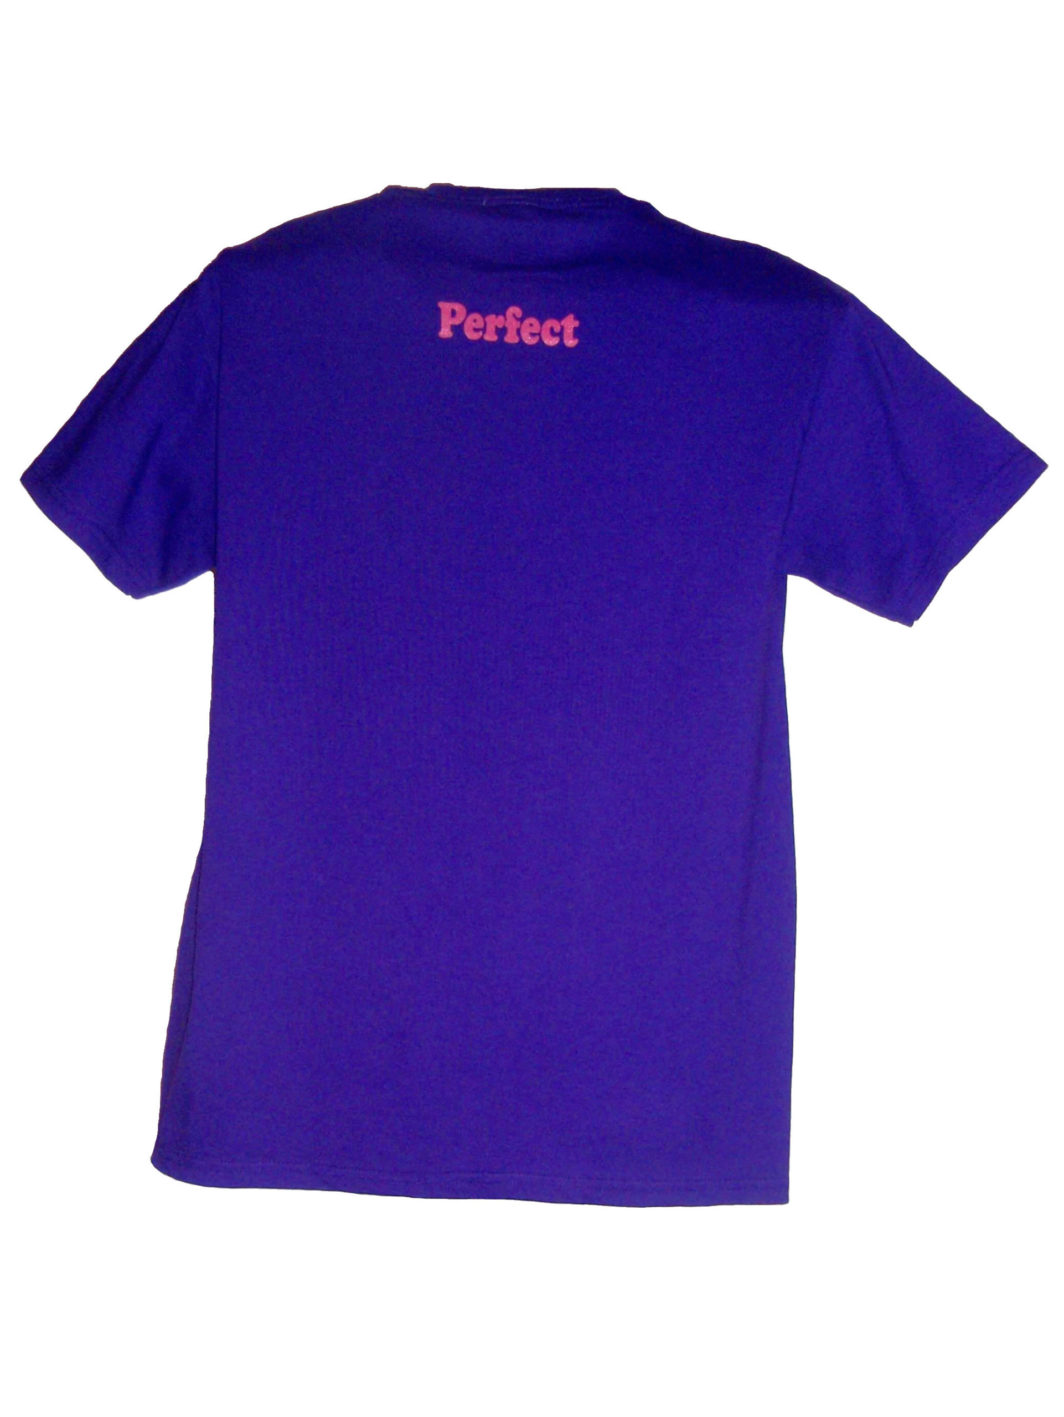 Im Not Perfect But My Dog Is T-Shirt Purple Back